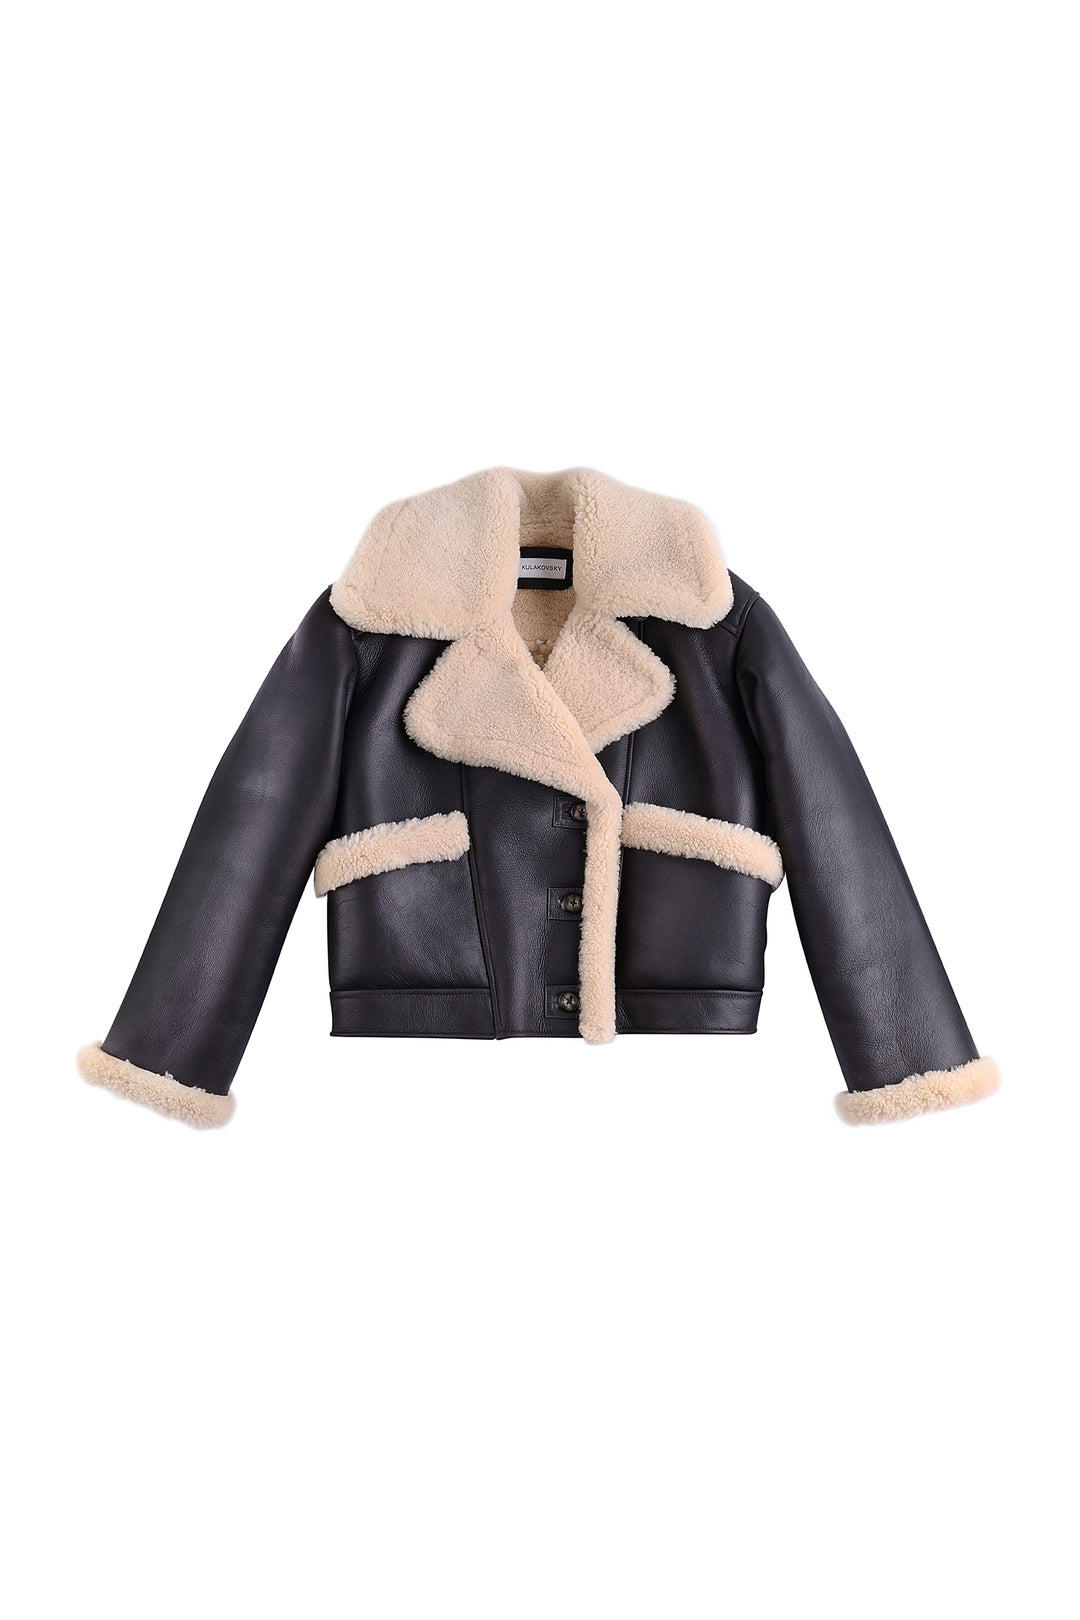 CROPPED SHEARLING JACKET IN DARK CHOCOLATE COLOR